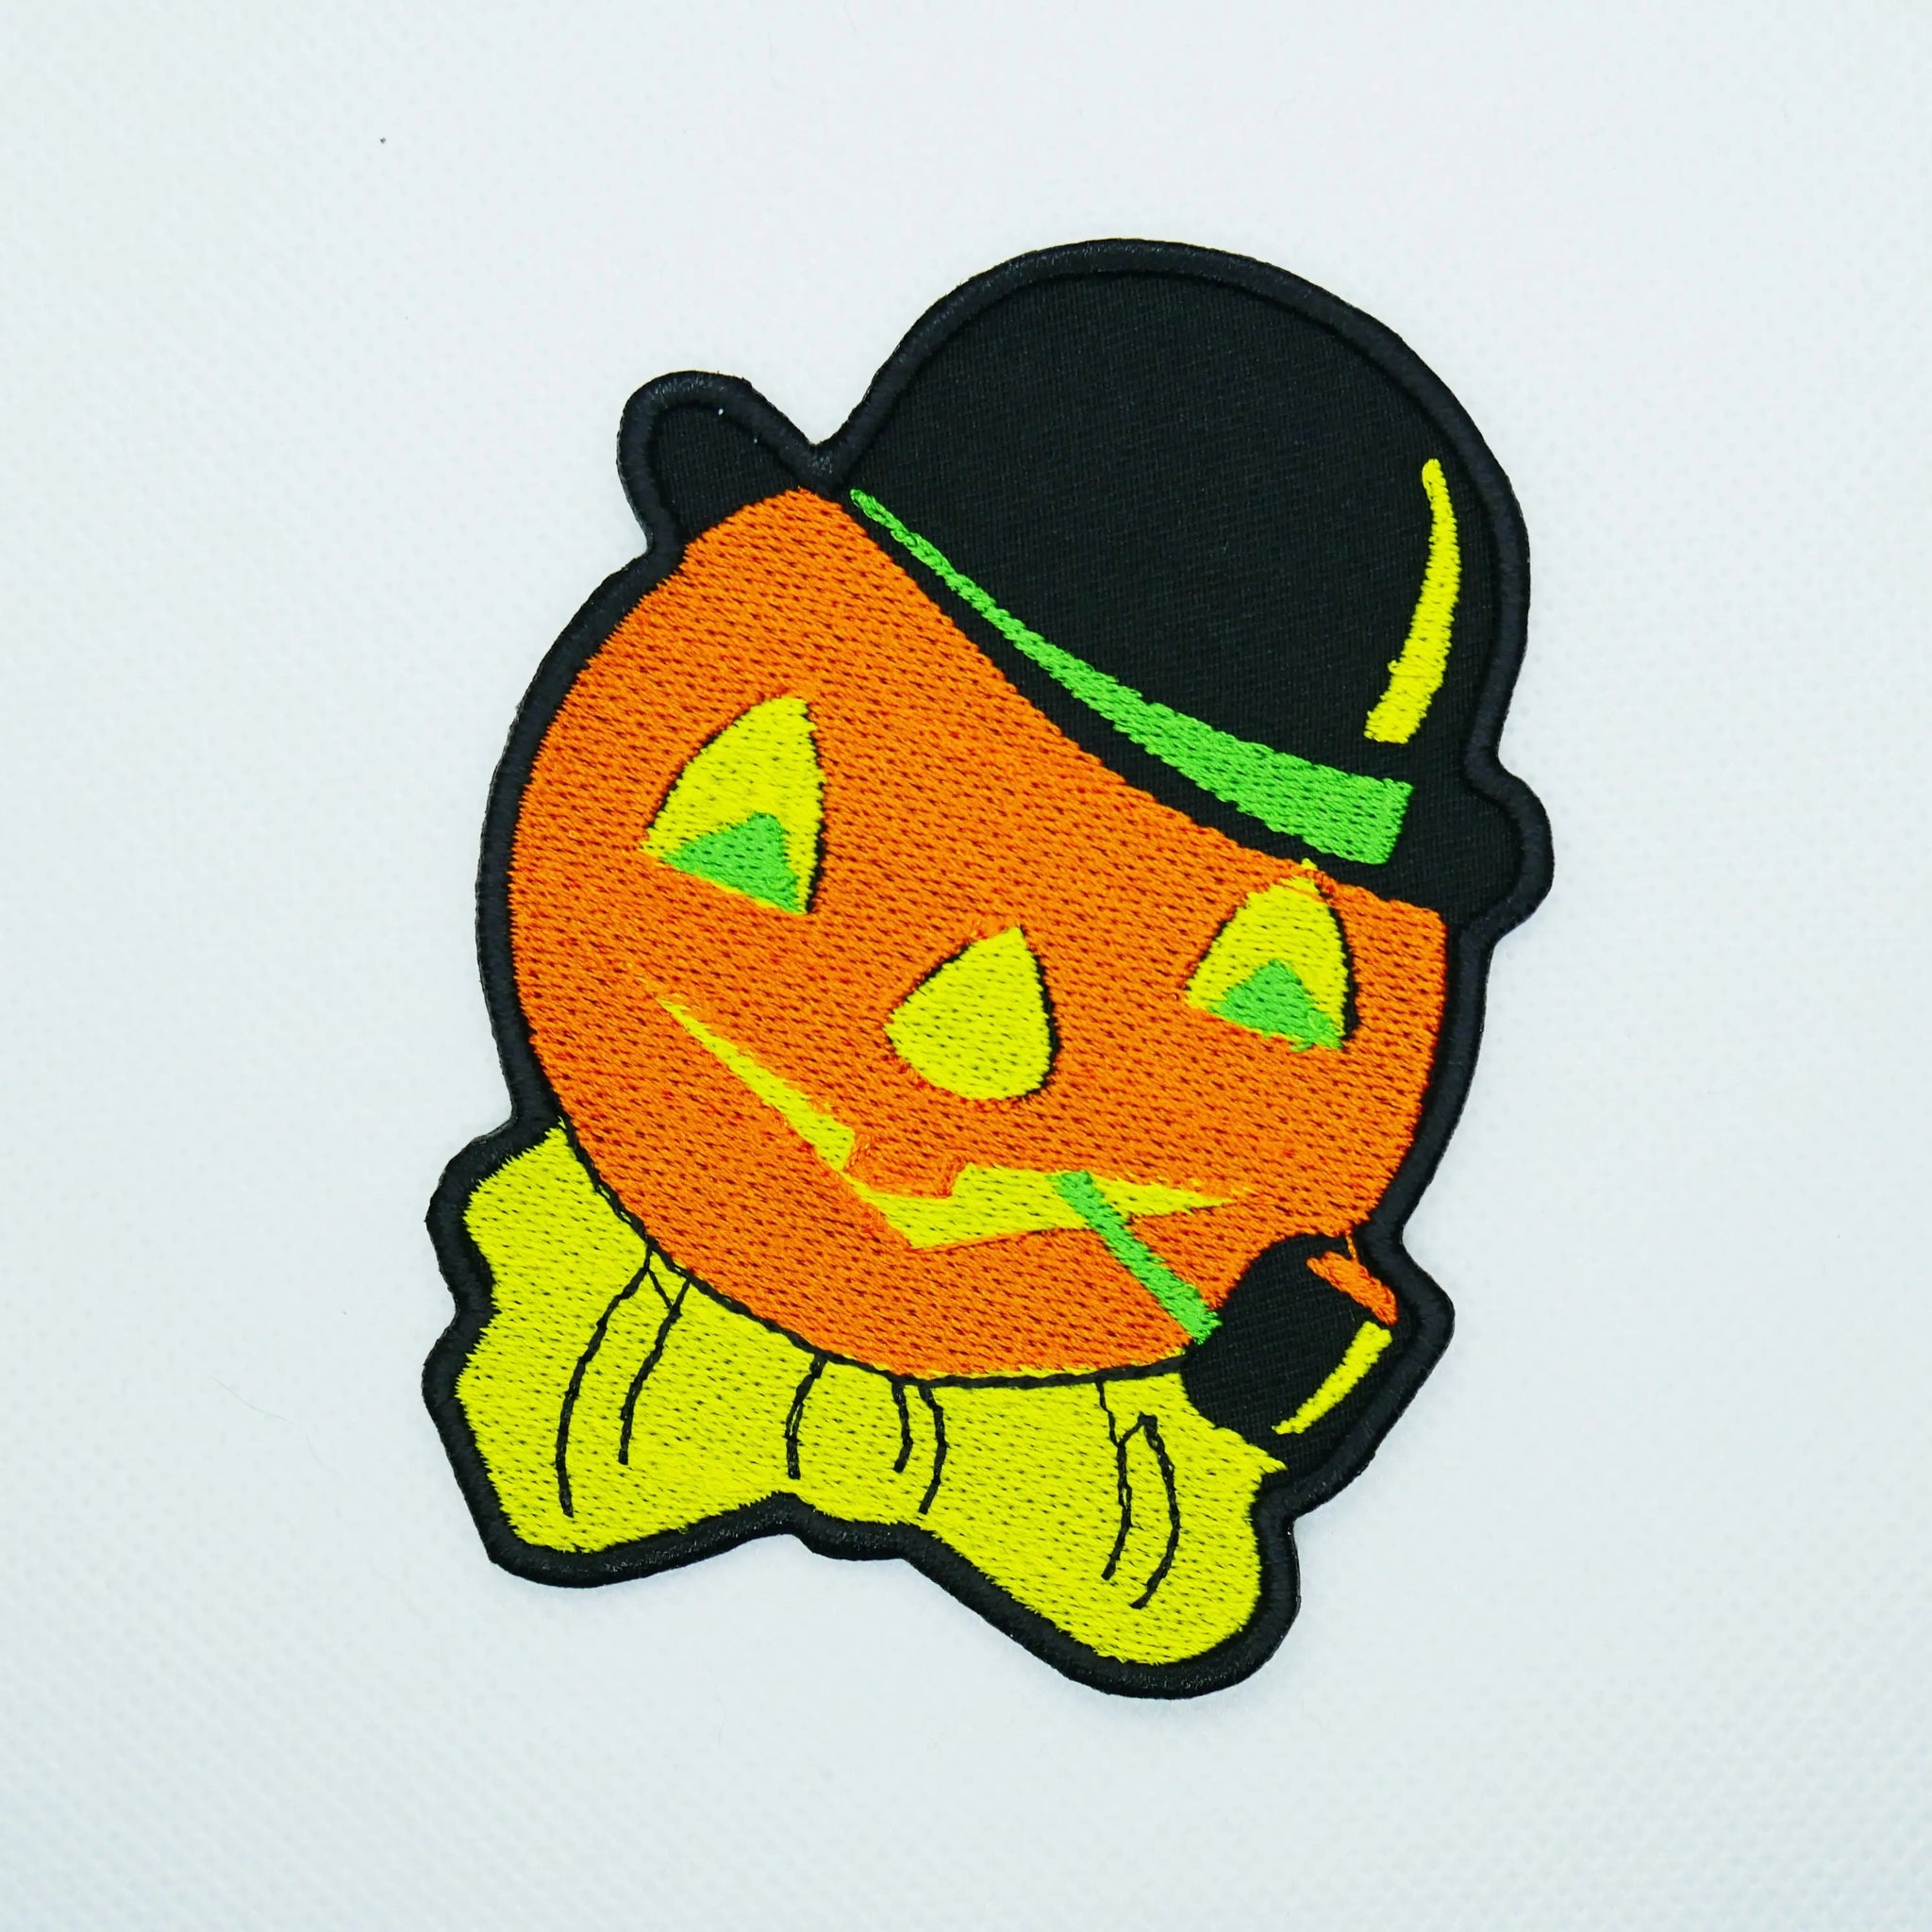 A cotton twill embroidered patch of a vintage Halloween decoration style carved pumpkin with a bowler hat, bow tie and corncob pipe